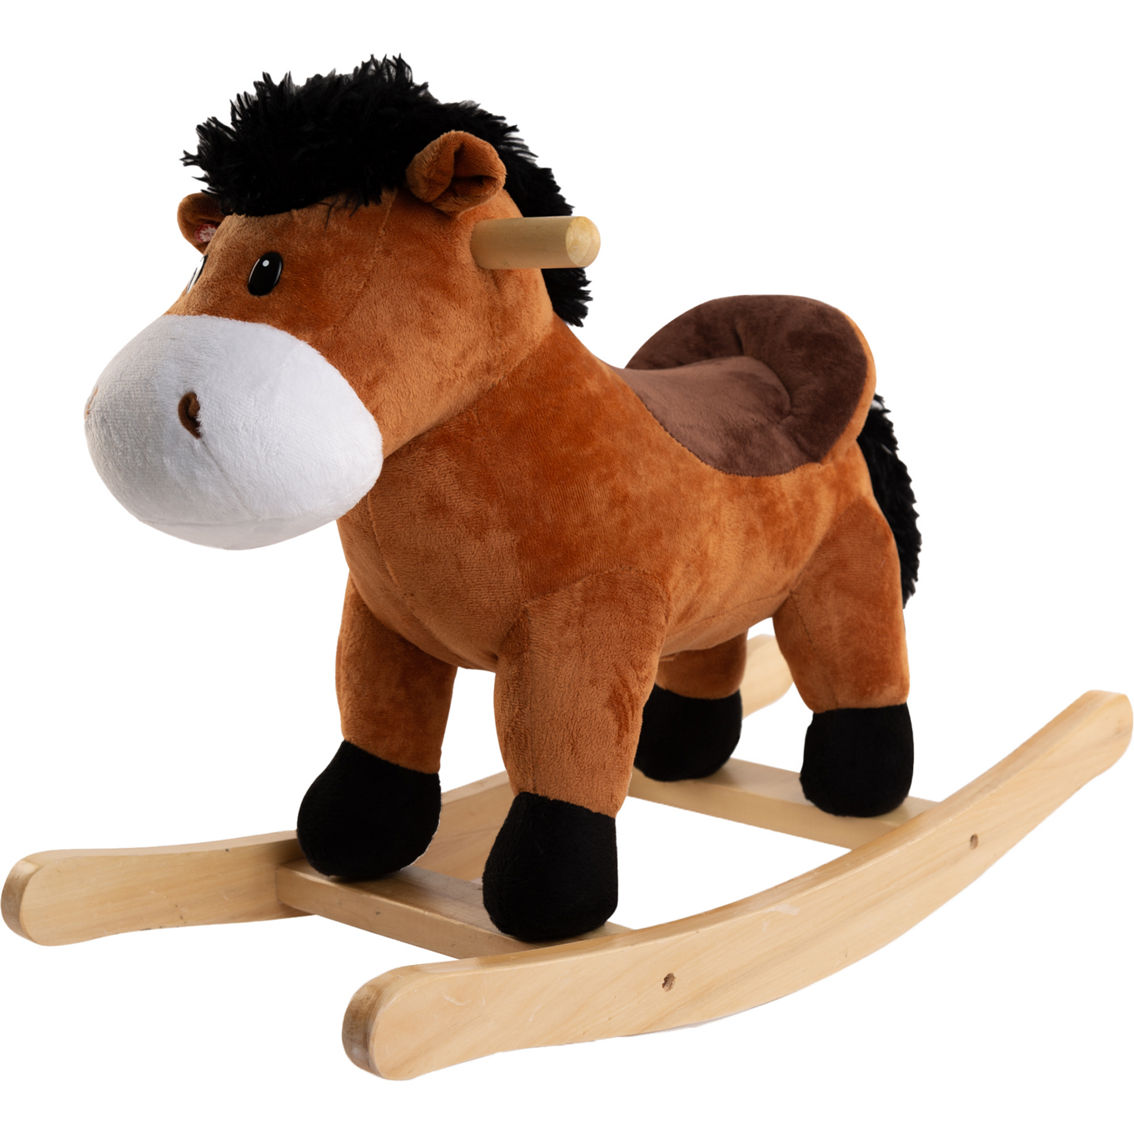 Ponyland Toys Brown Rocking Horse with Sound - Image 2 of 5